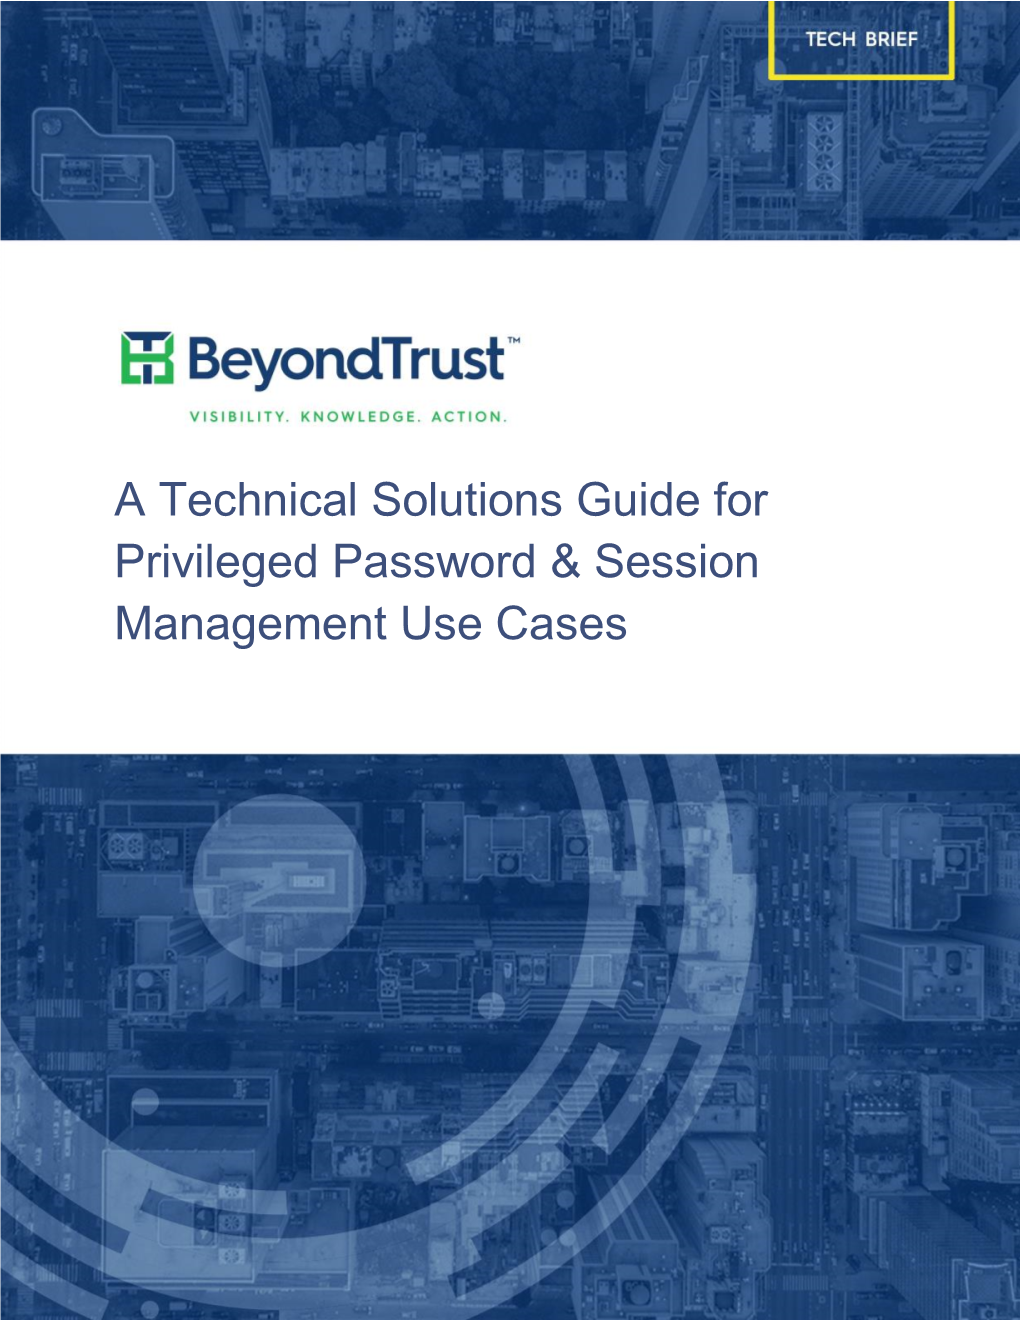 A Technical Solutions Guide for Privileged Password & Session Management Use Cases